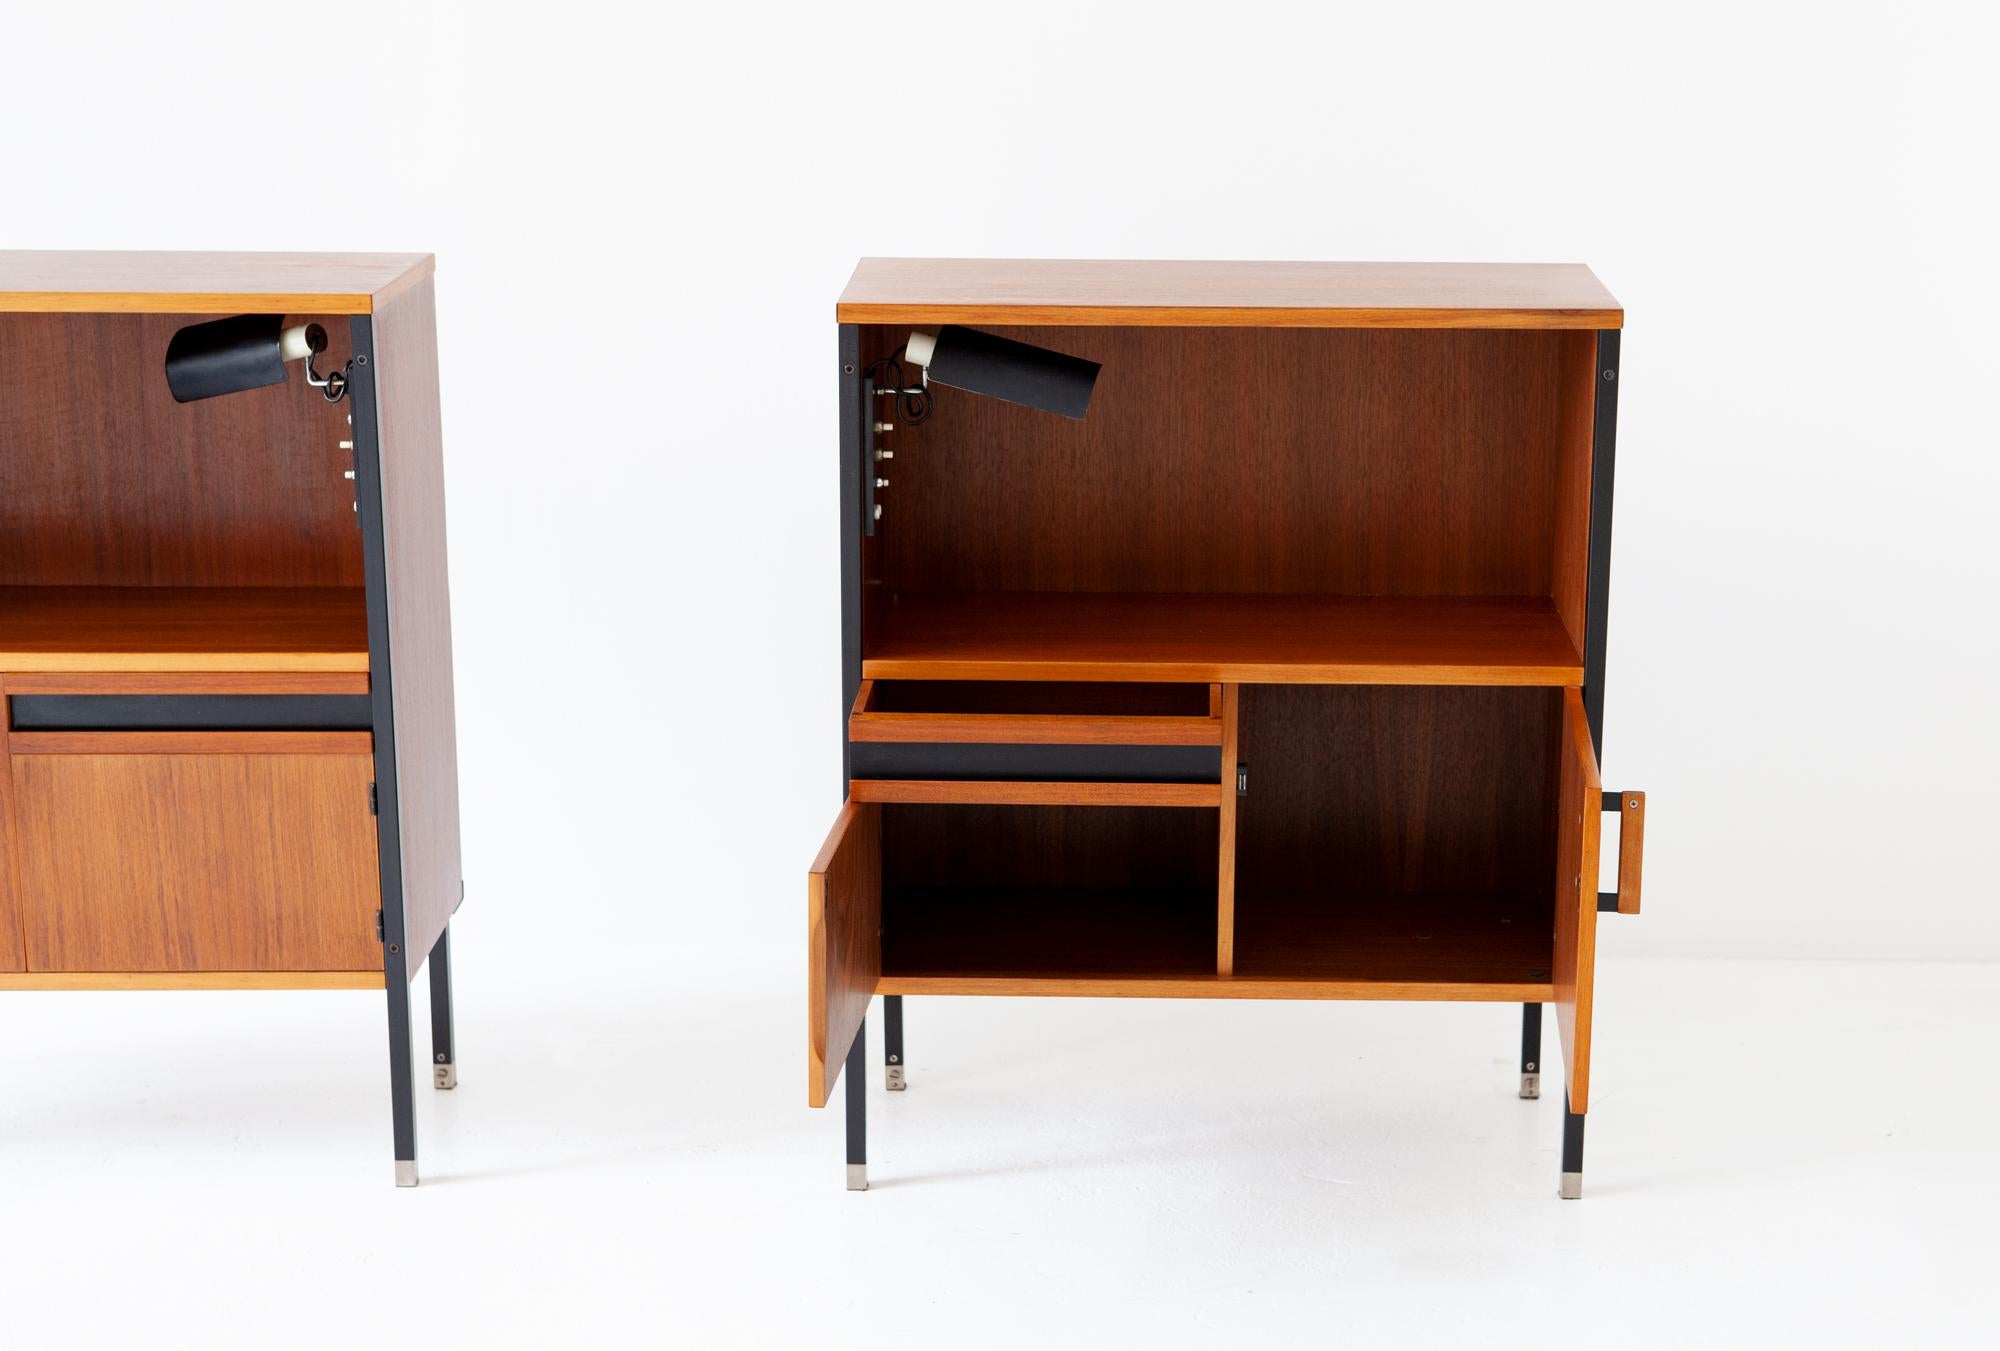 Mid-20th Century Pair of Nightstands by Ico Parisi for MIM with Gino Sarfatti Lamps, 1958